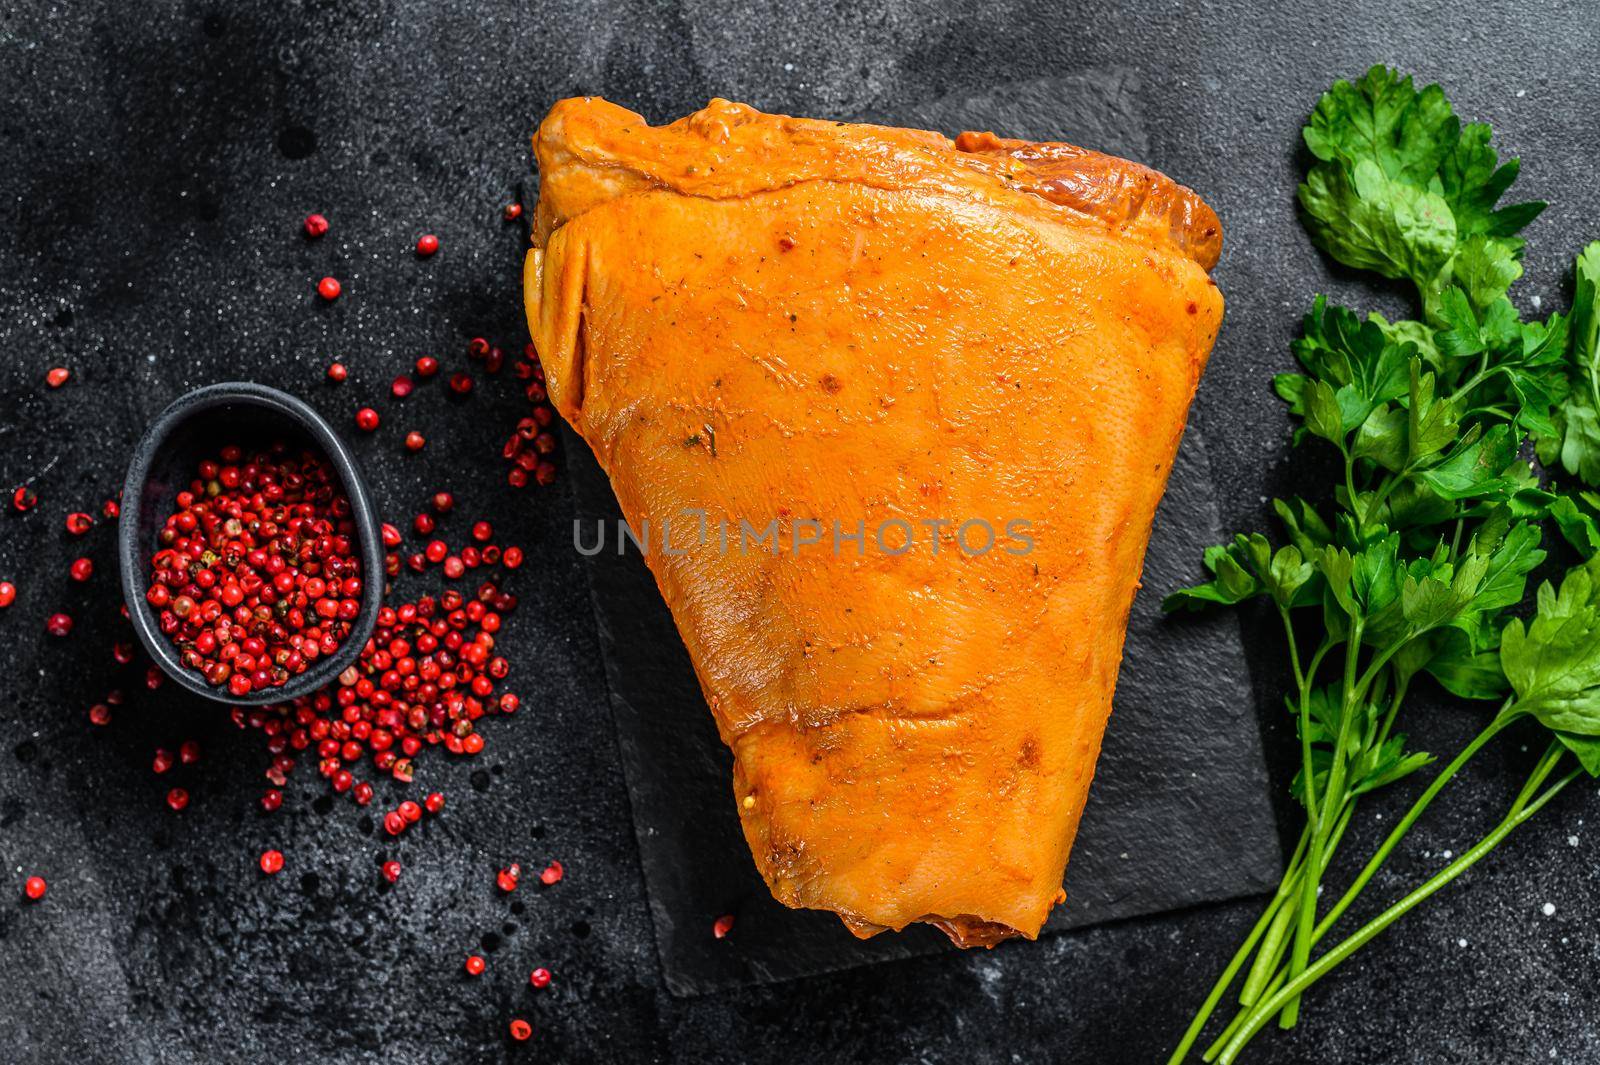 Raw pork leg with herbs and marinate on table. Black background. Top view.